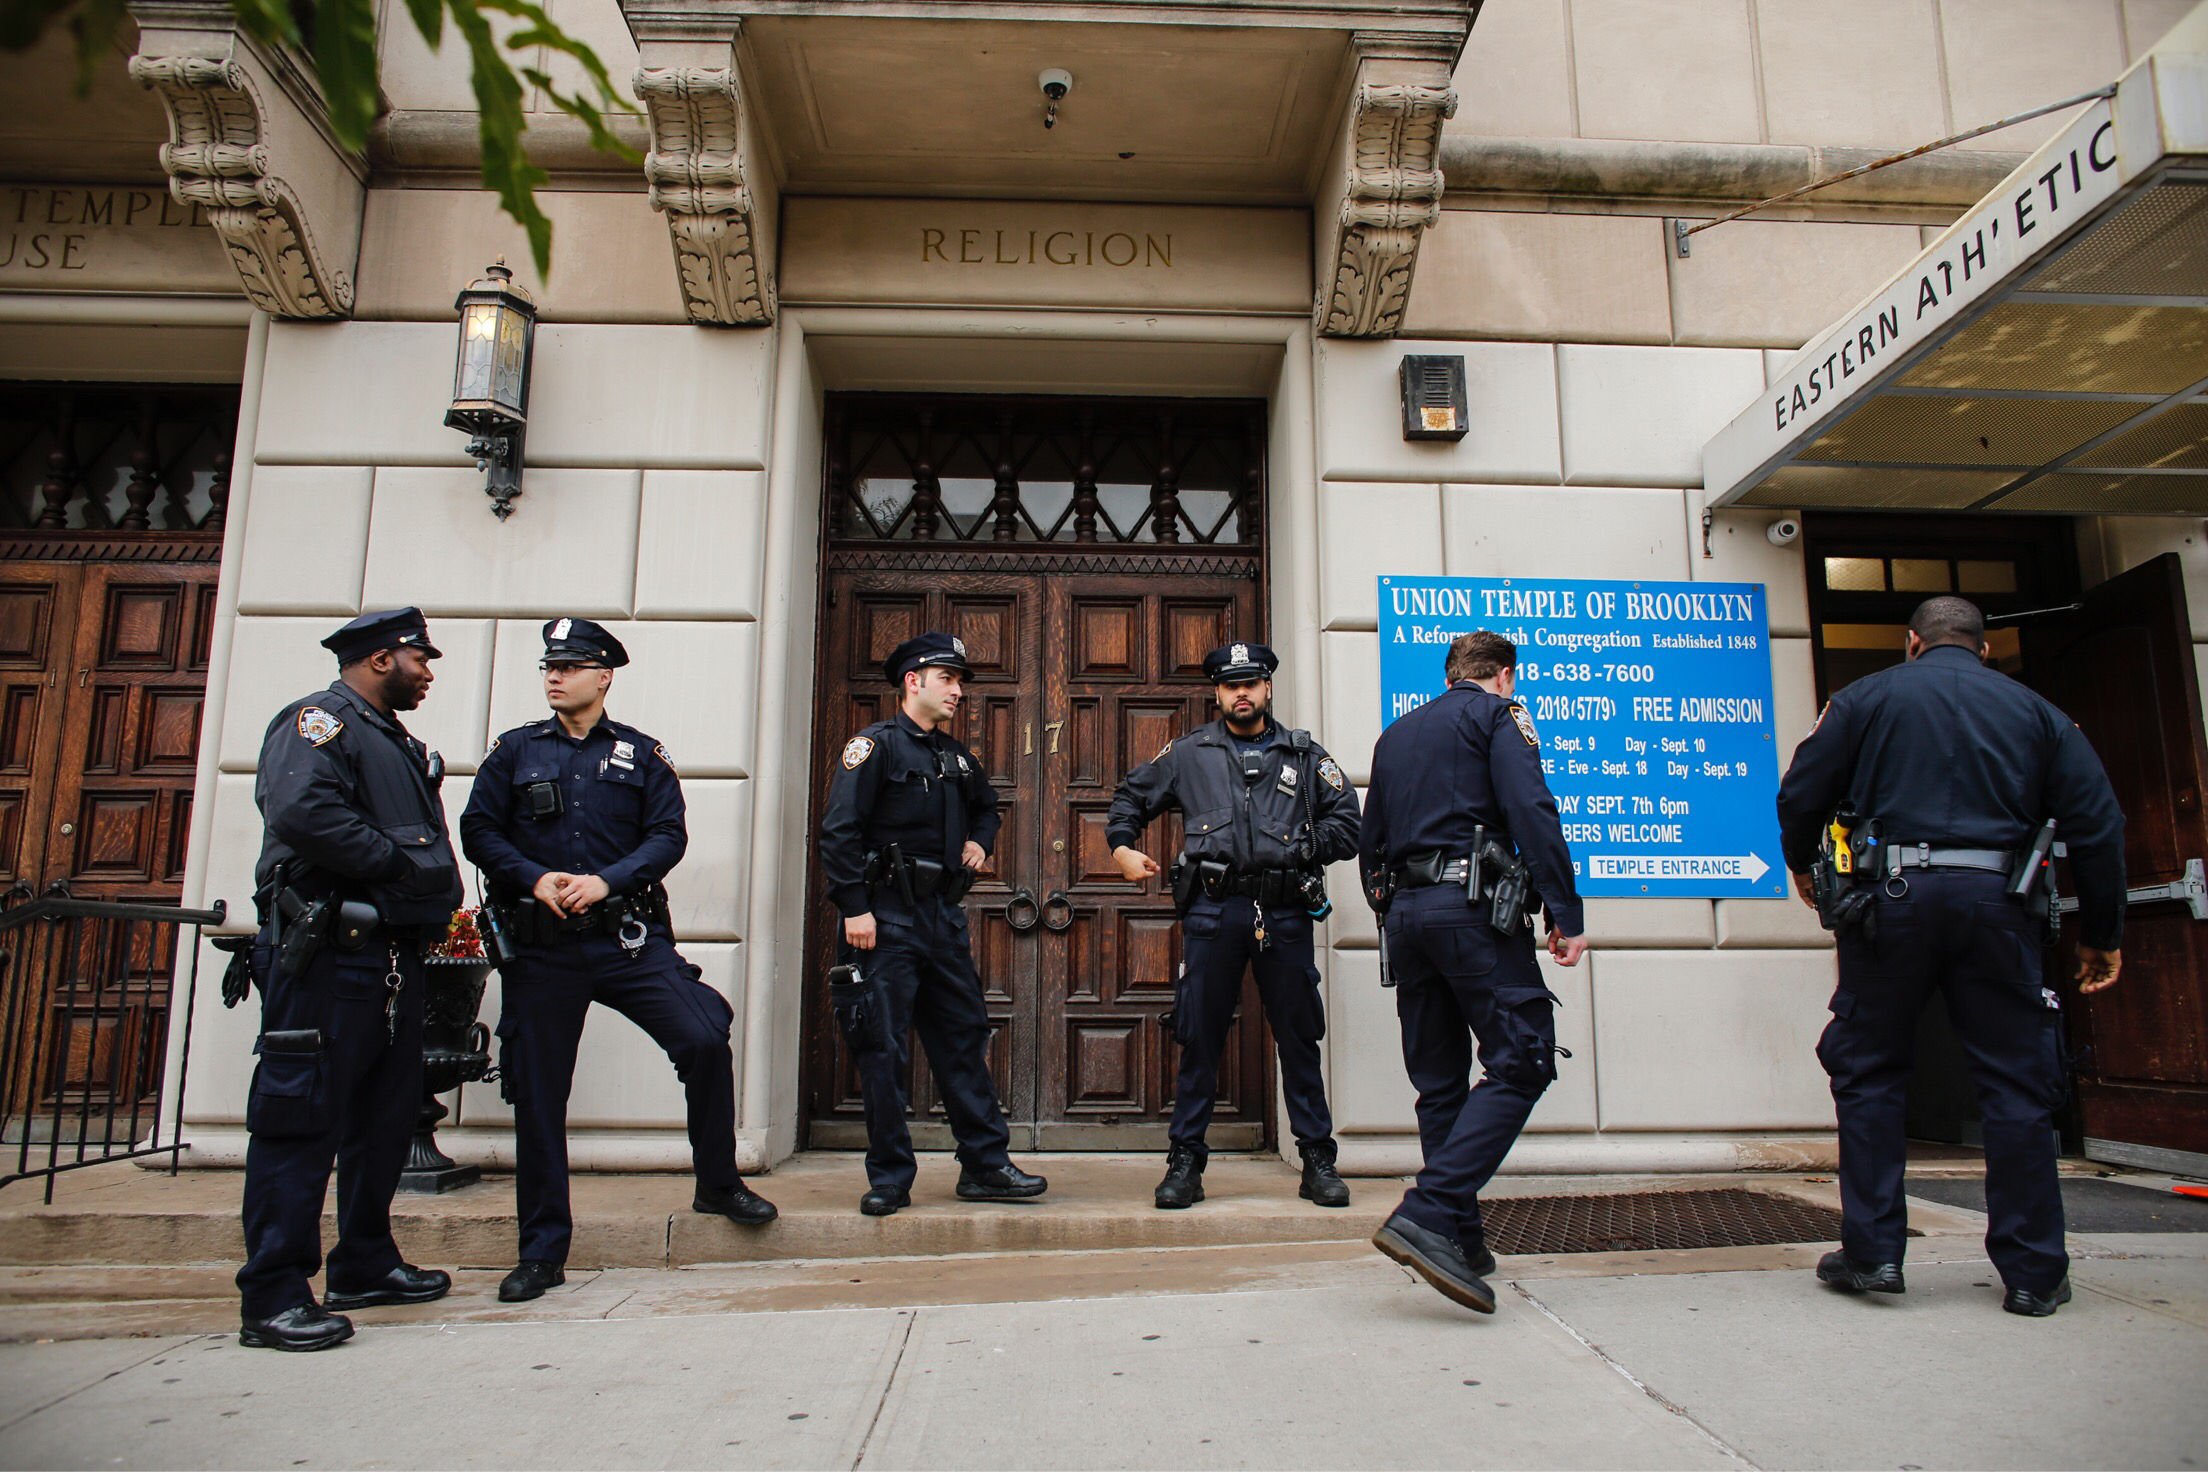 NYPD officers stand guard at the door of the Union Temple of Brooklyn on November 2, 2018 in New York City. - New York police were investigating anti-Semitic graffiti found inside a Brooklyn synagogue that forced the cancellation of a political event less than a week after the worst anti-Semitic attack in modern US history. (KENA BETANCUR/AFP/Getty Images)